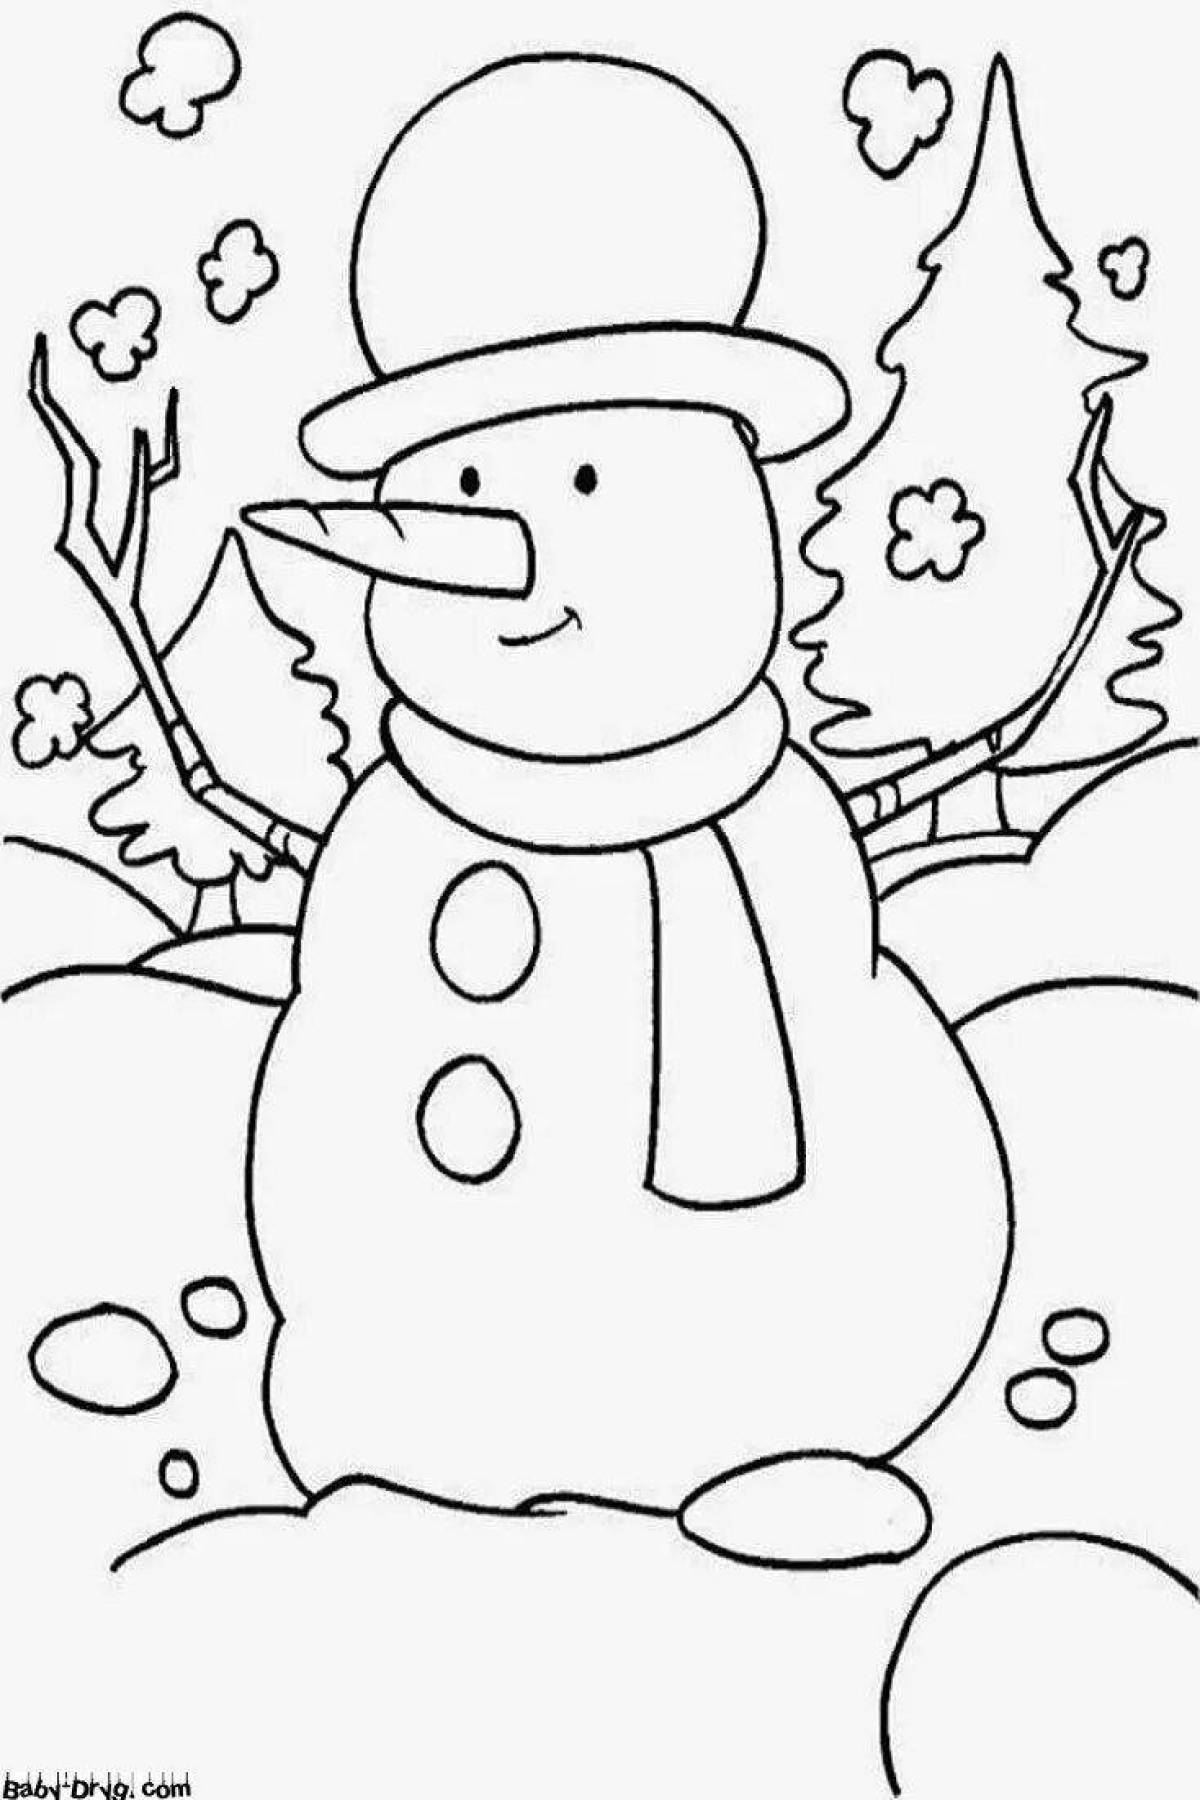 Coloring page dazzling snowman